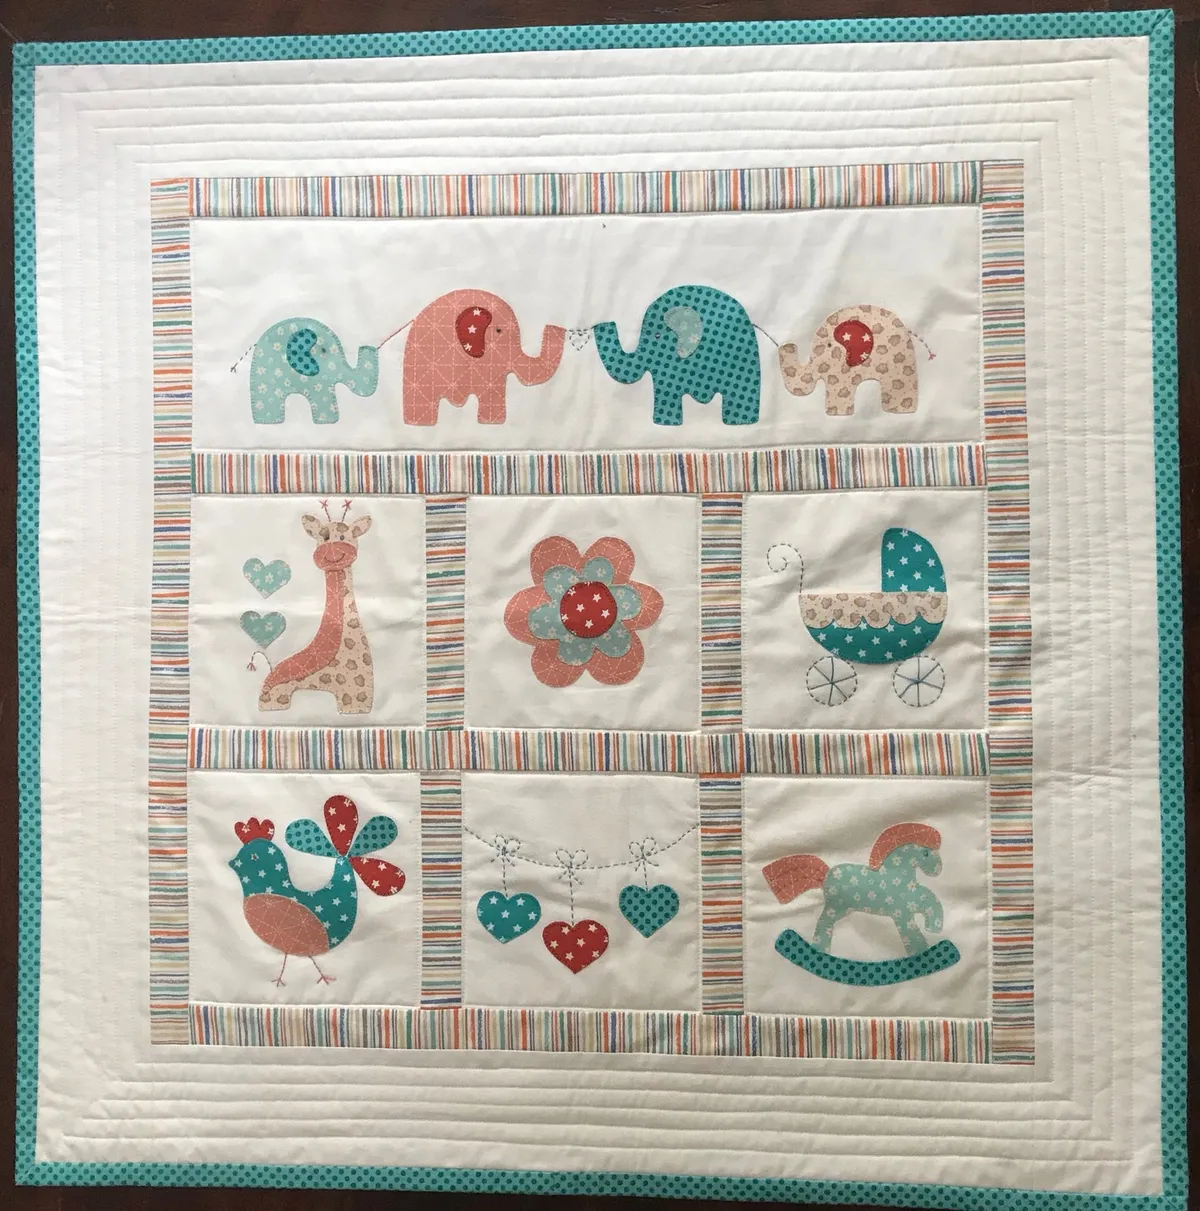 25 of the best baby quilt patterns to welcome new arrivals - Gathered